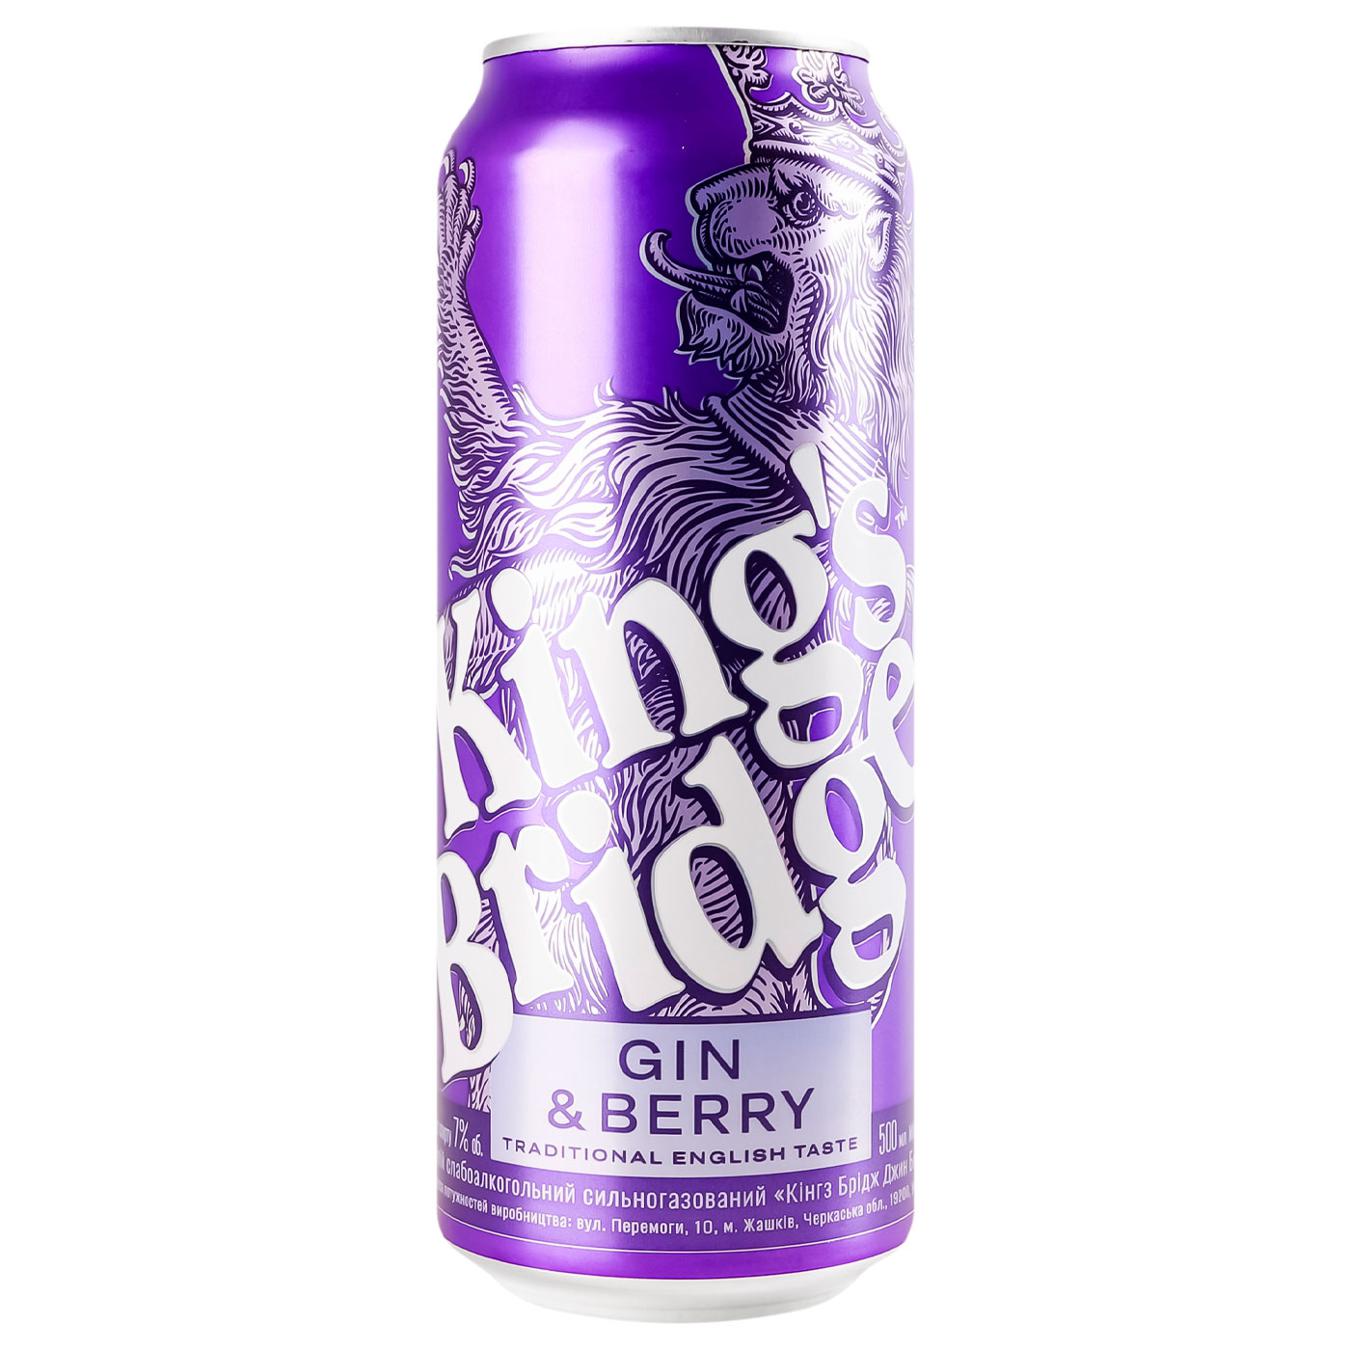 Low-alcohol drink Kings Bridge wild berries 7% 0.5 l iron can